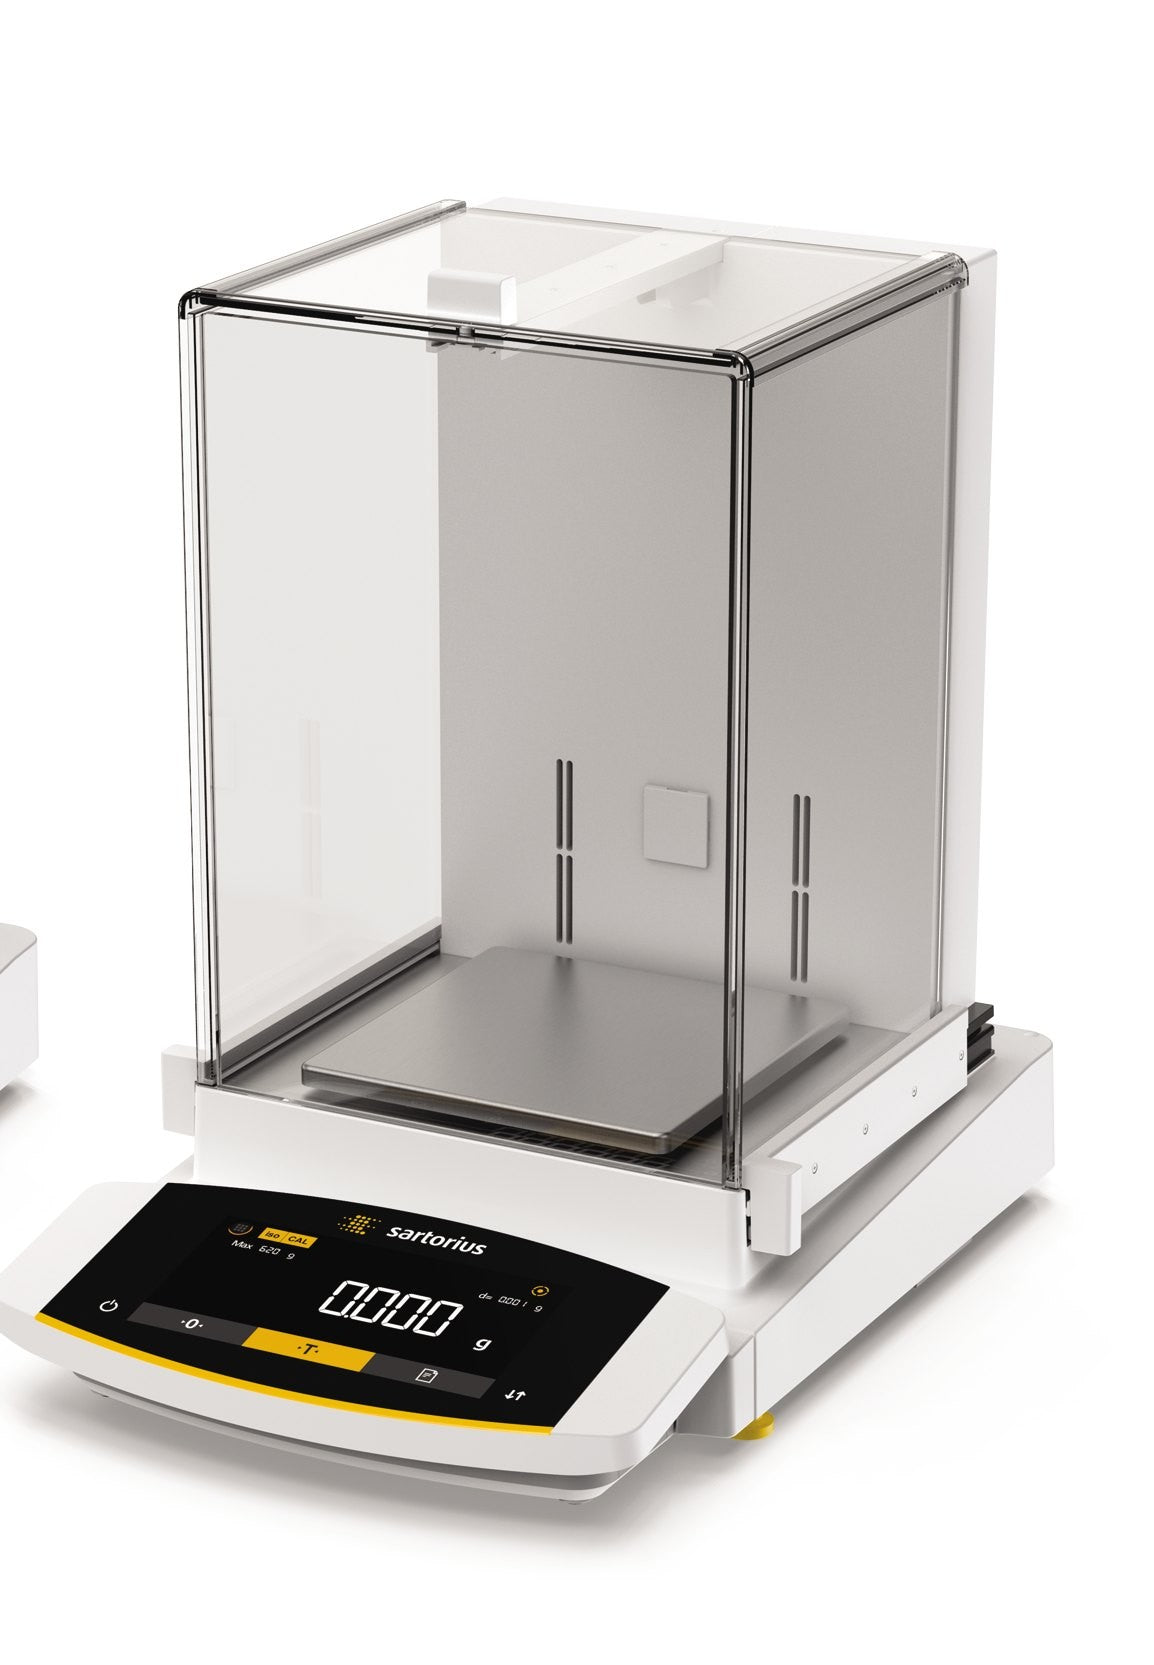 *NEW* SARTORIUS - CUBIS - 16000CT - TOUCH SCREEN - PRICE ON DEMAND!